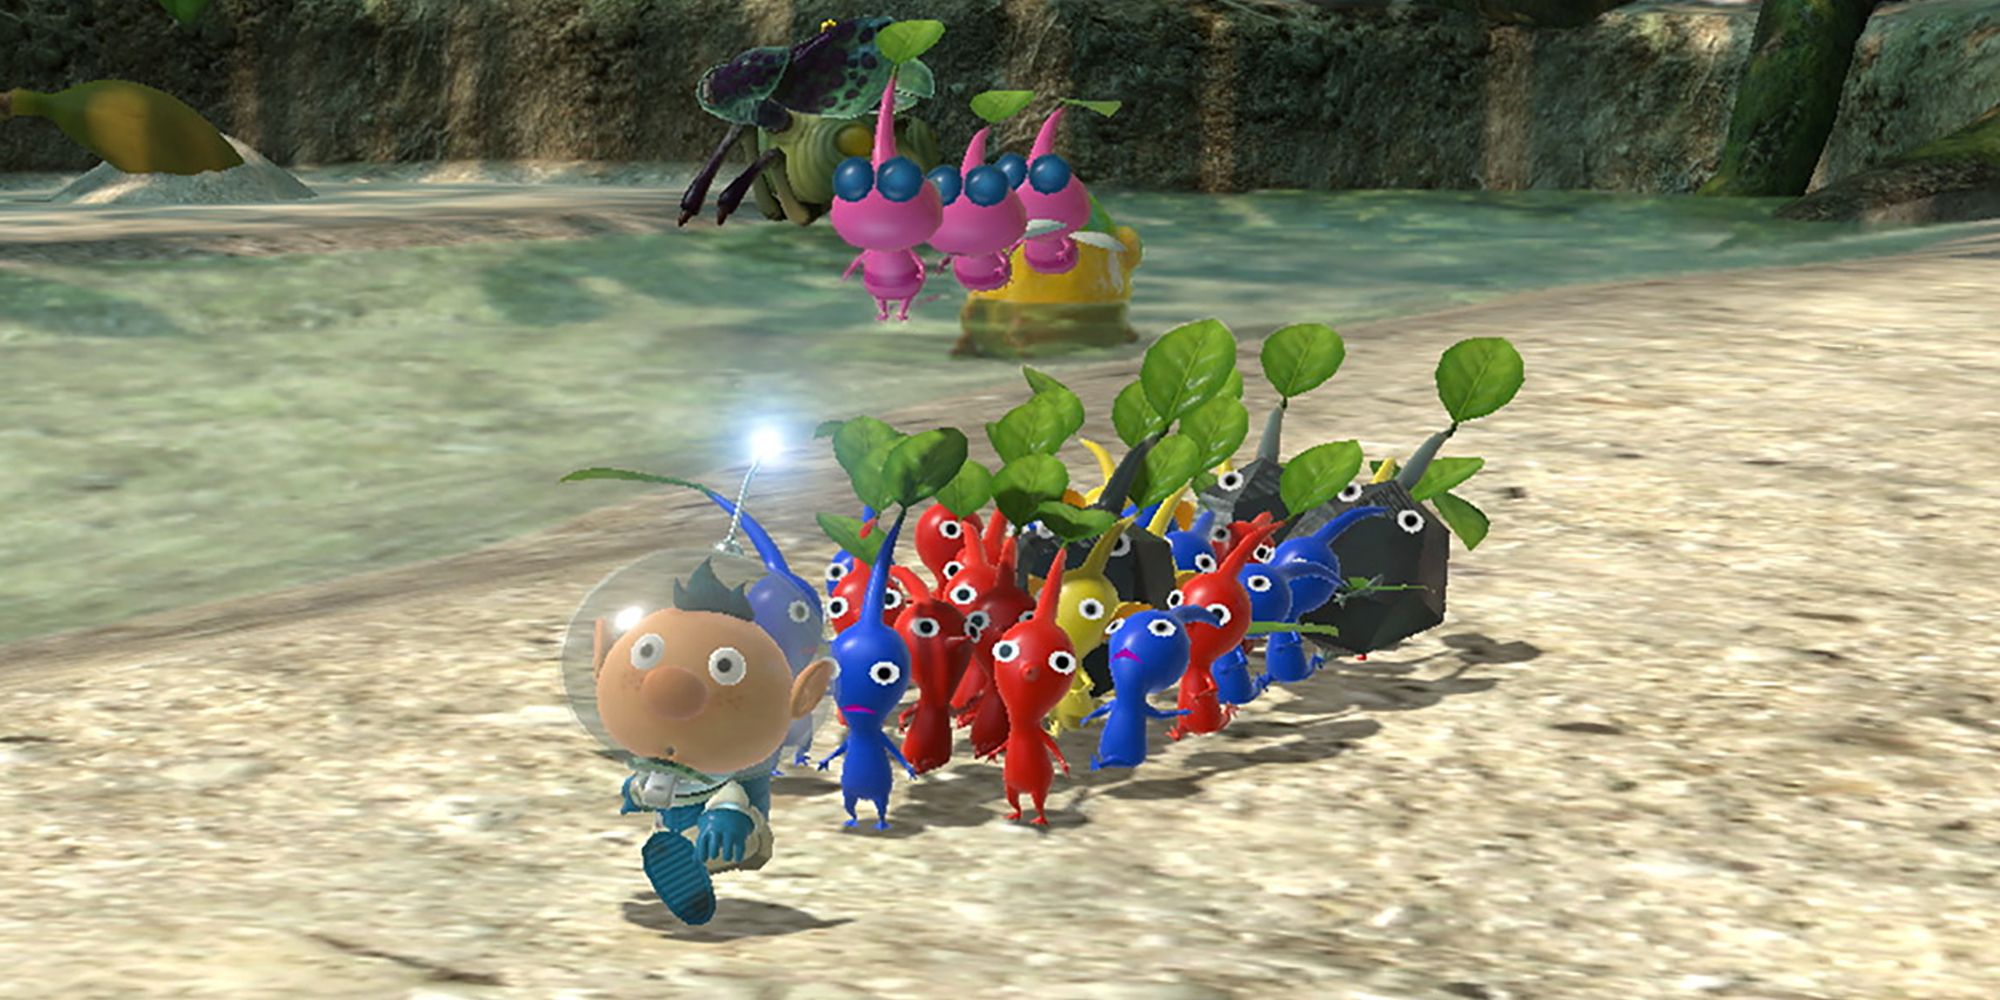 Leading a group of Pikmin in Pikmin 3